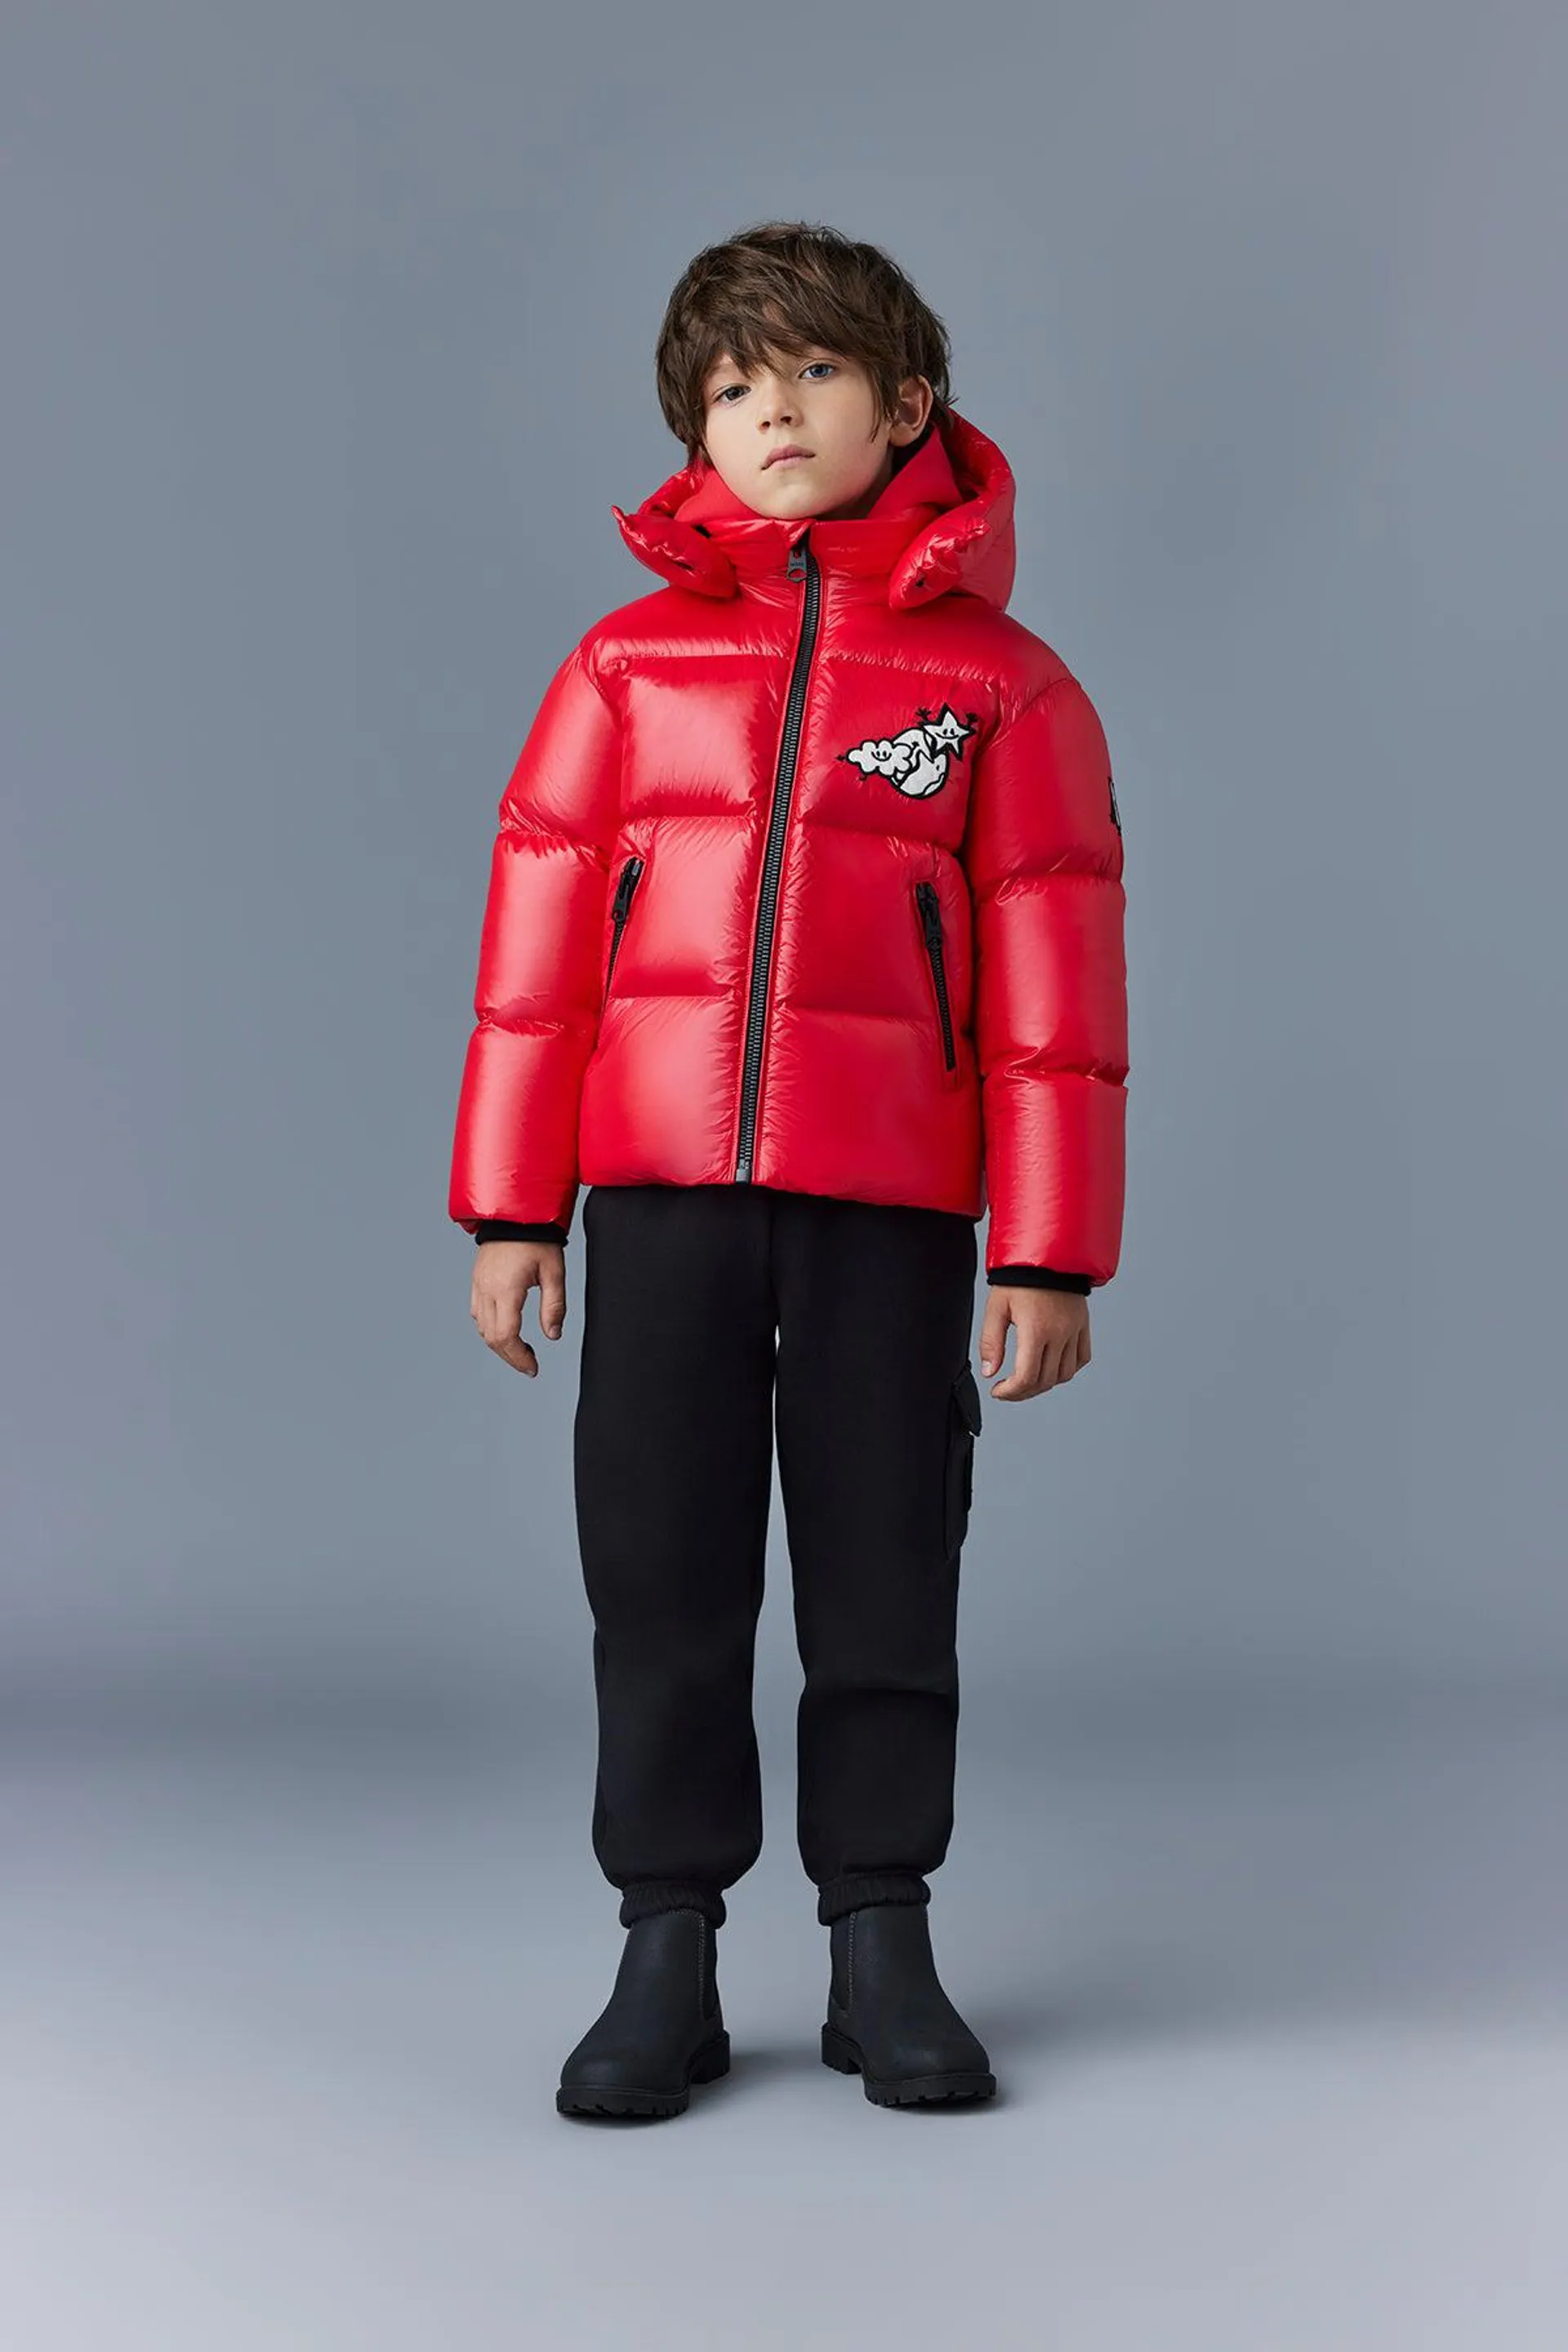 JESSE-ML Lightweight down jacket with collab logo and graphics for kids (8-14 years)